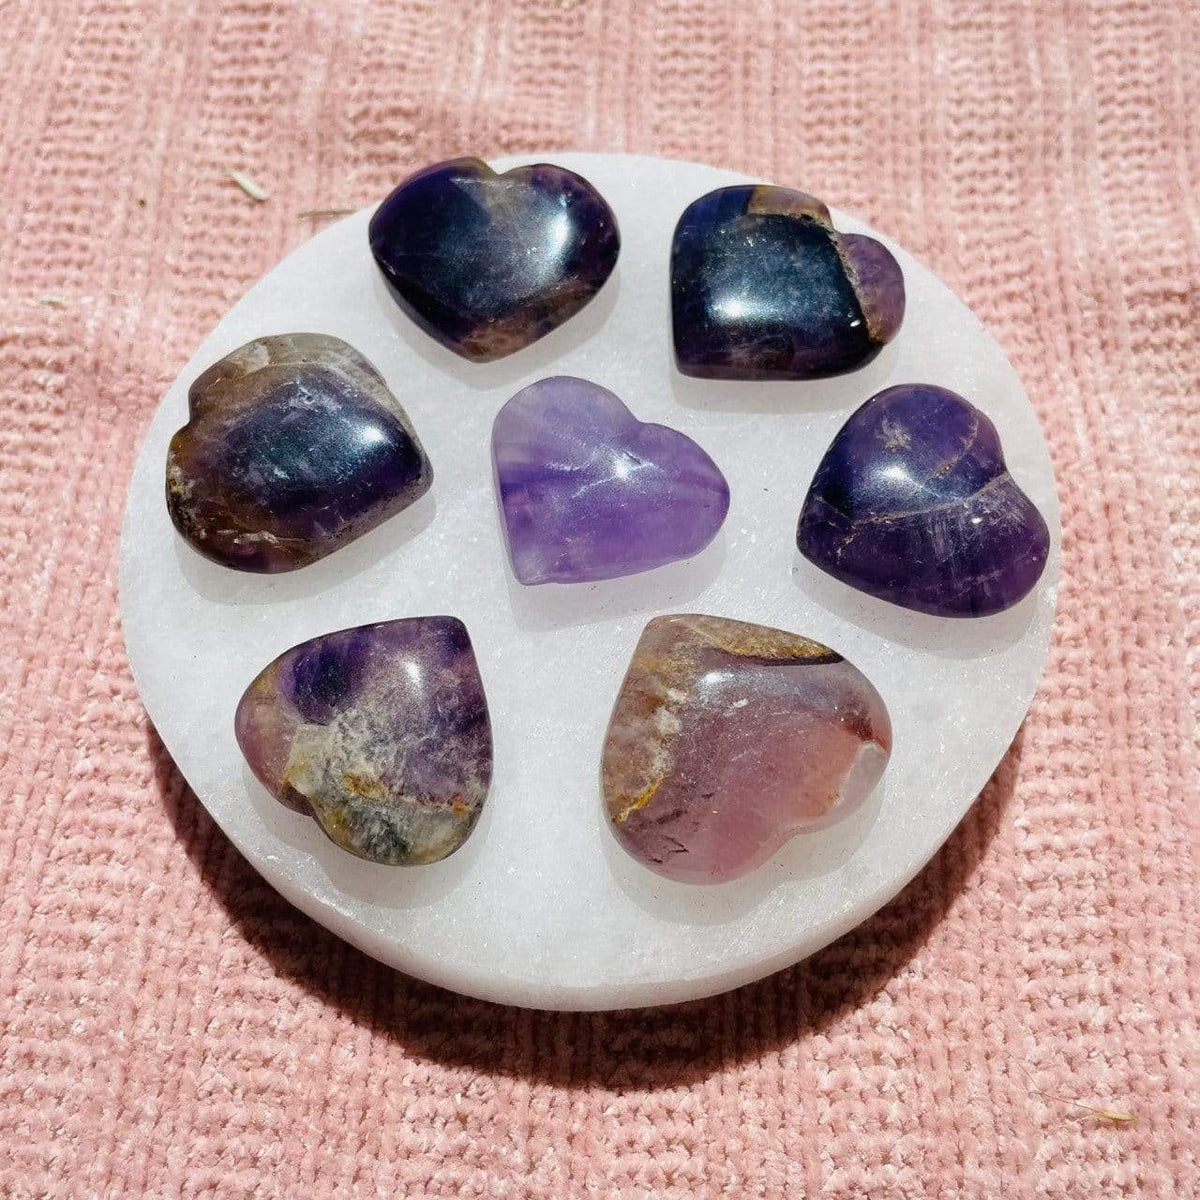 Heart Stone Crystals Variety of Options Dainty Crystals Small Amethyst